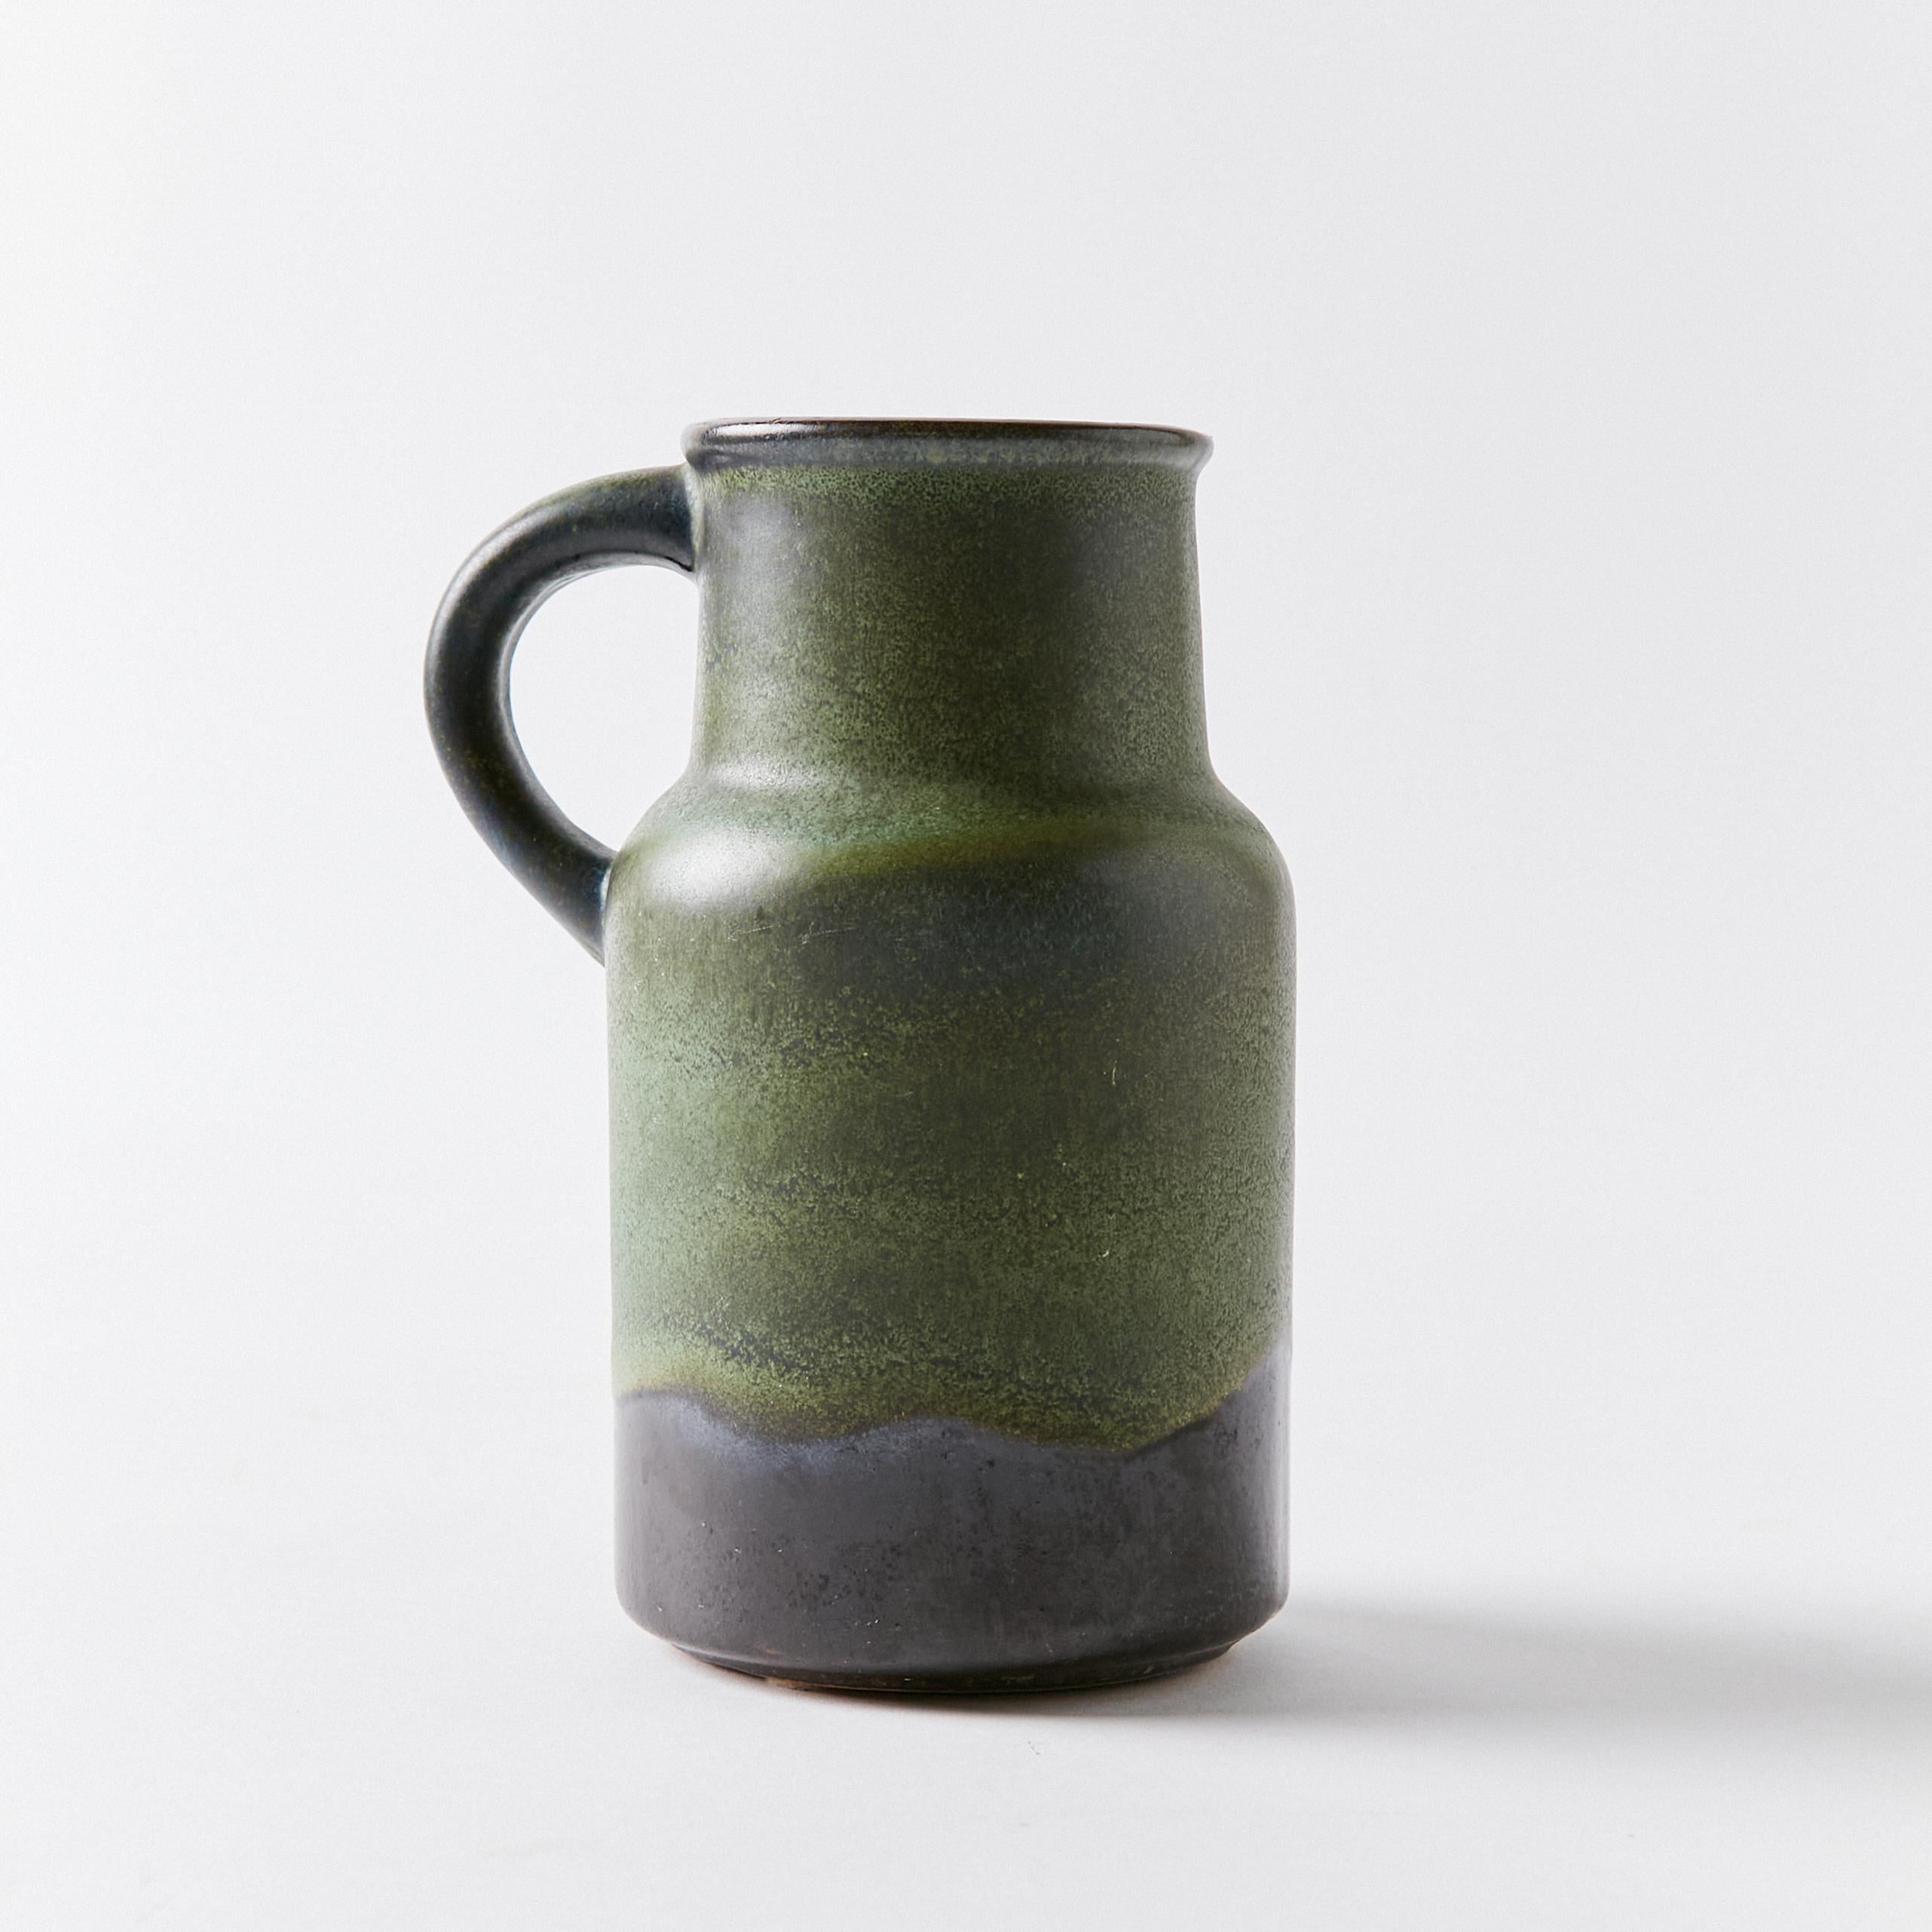 Fat lava vase in dry green tones by Scheurich Keramik. Signature stamp on bottom.